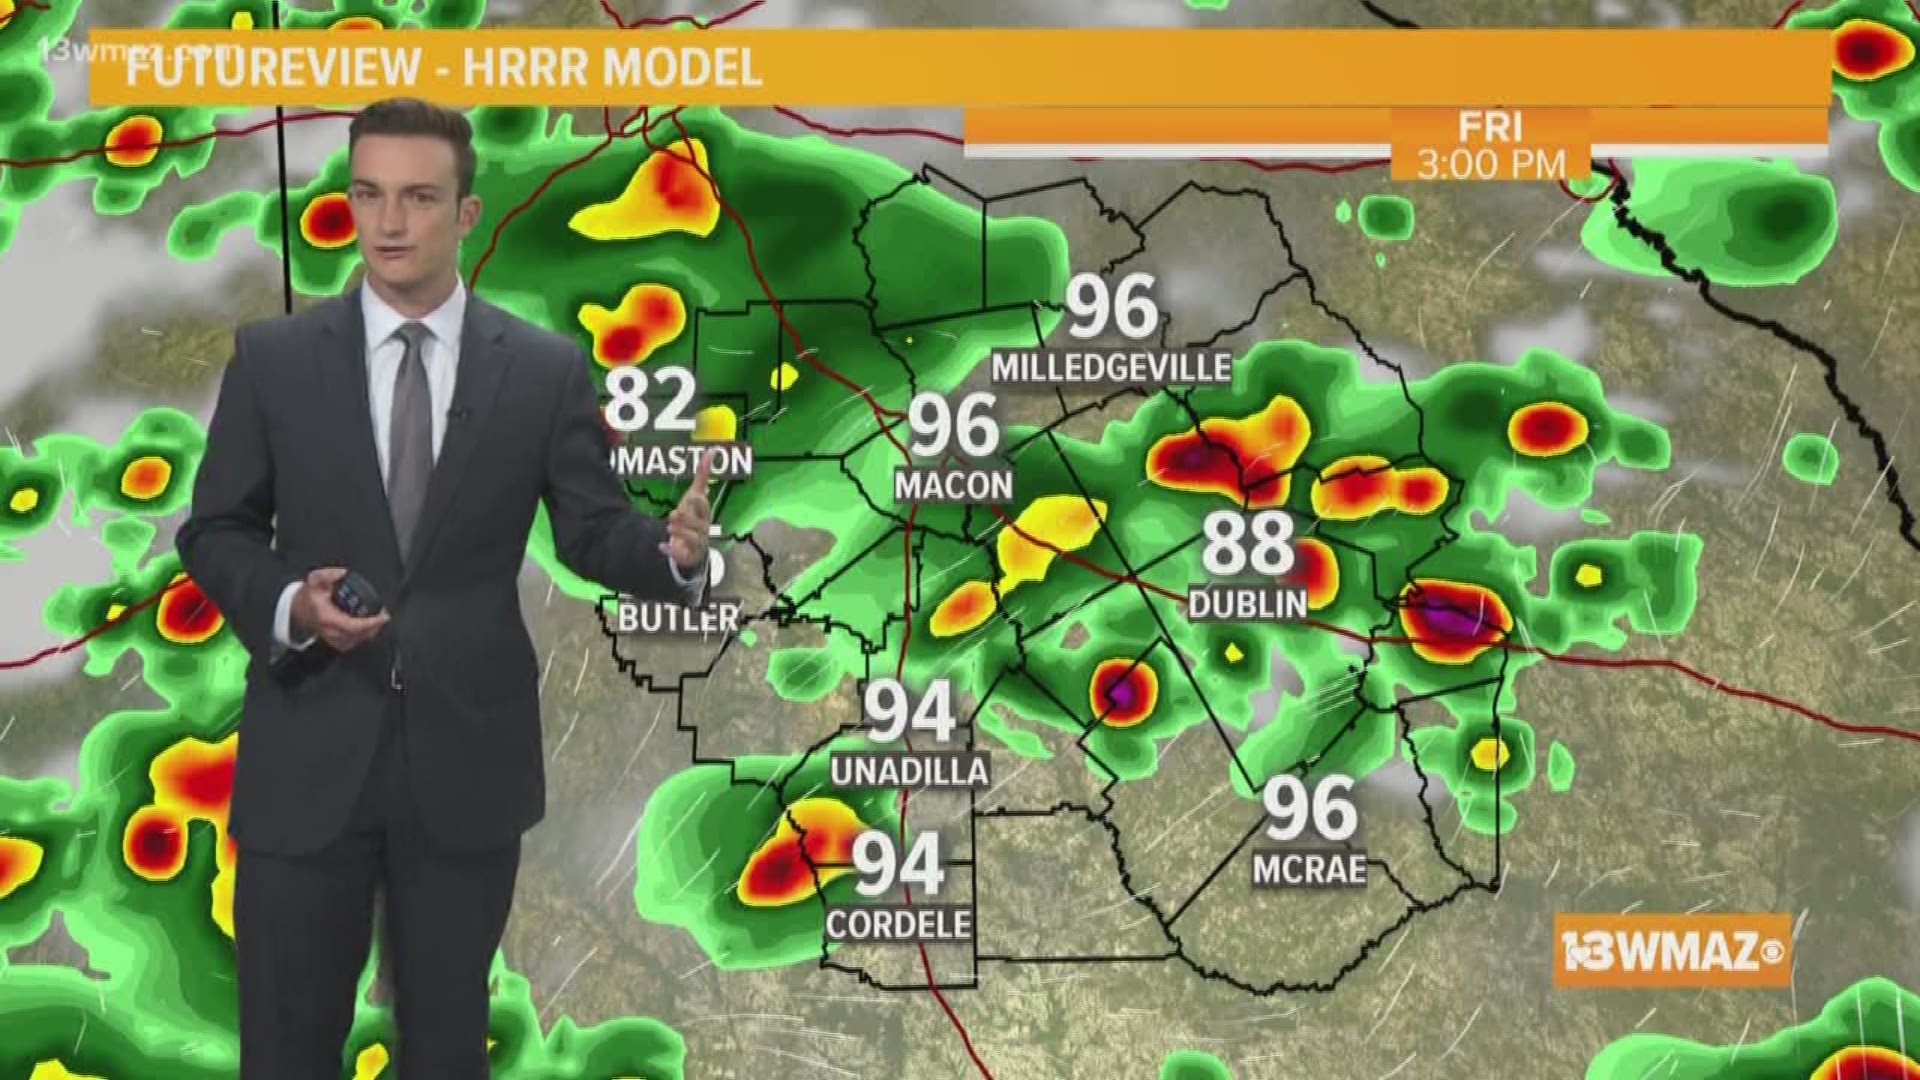 Another round of scattered storms for Friday afternoon and evening